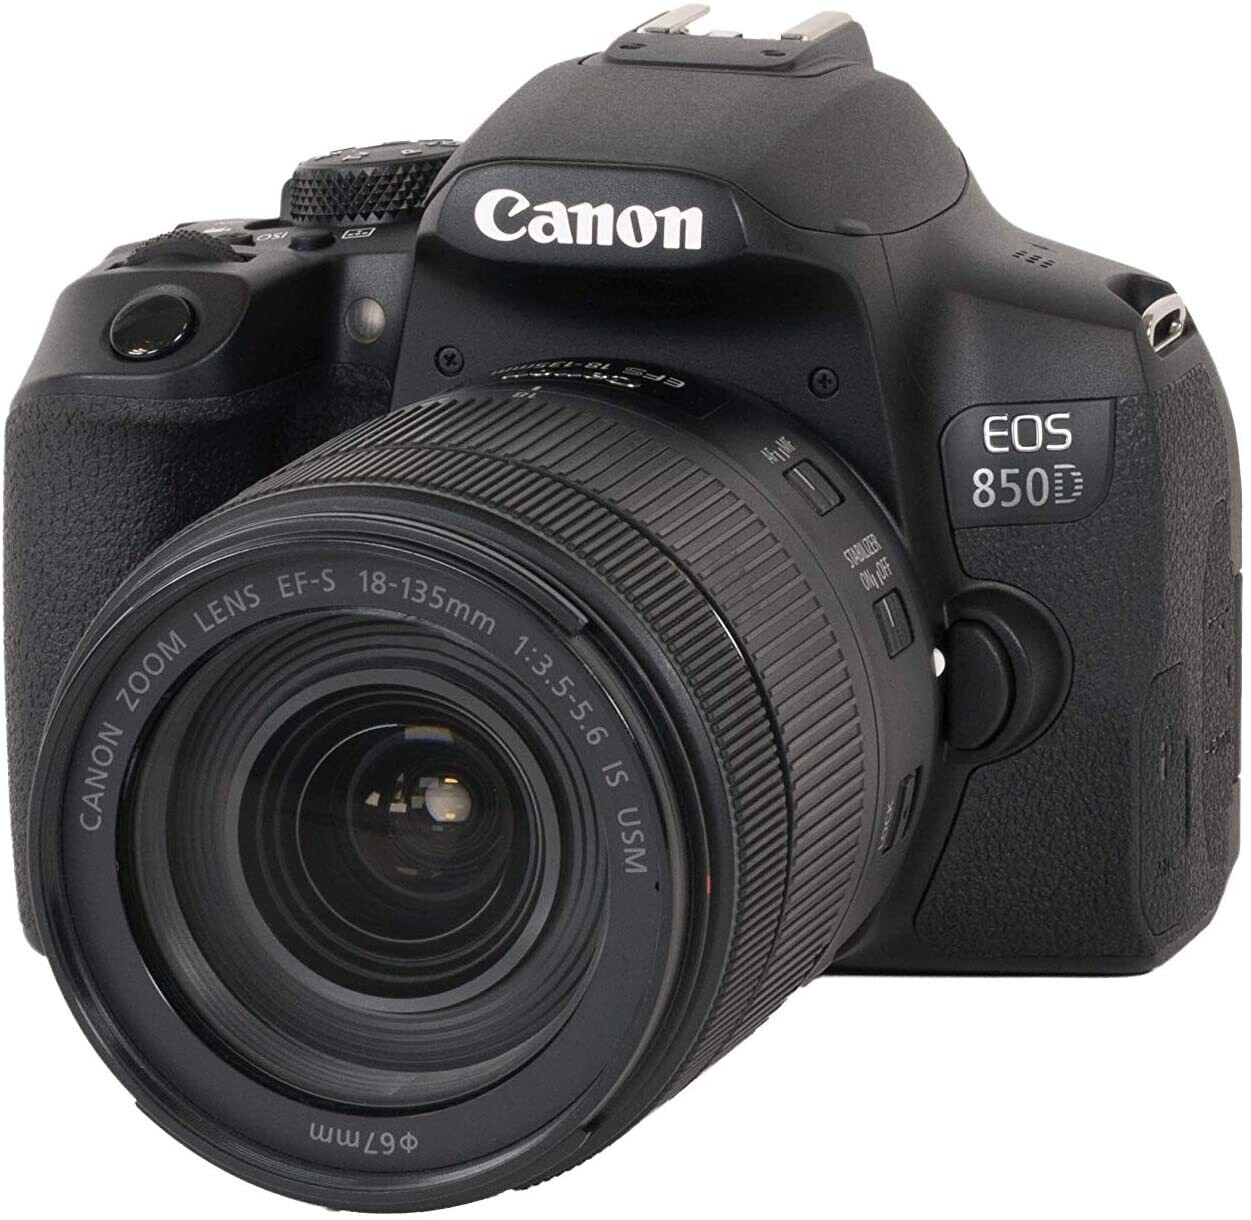 Canon EOS 850D + EF-S 18-135mm f/3.5-5.6 IS USM, Black